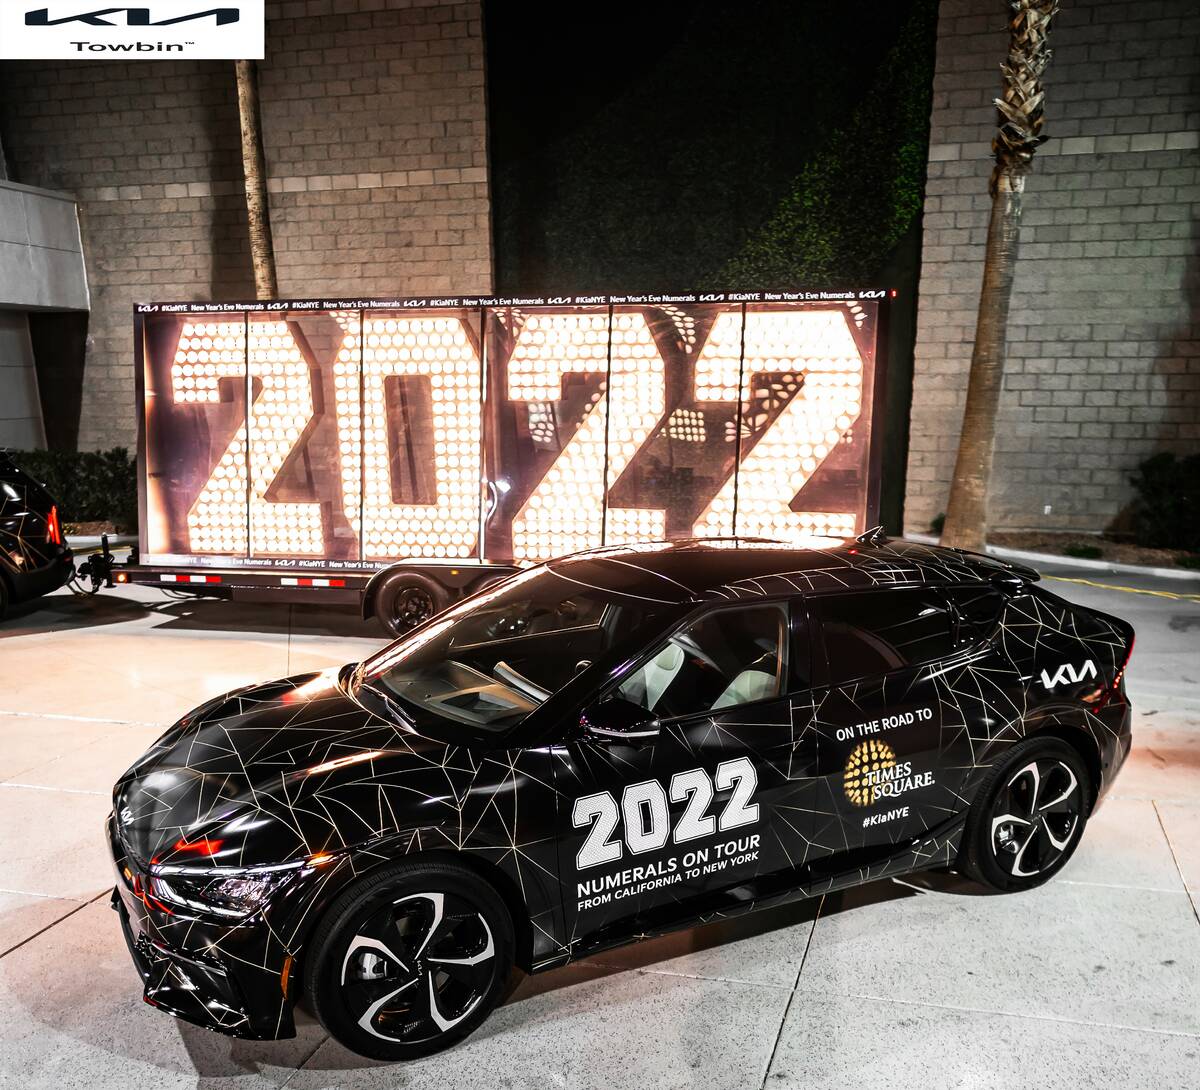 Towbin Kia hosted Kia America’s 2022 New Year's Eve Numerals tour as the digits made the cros ...